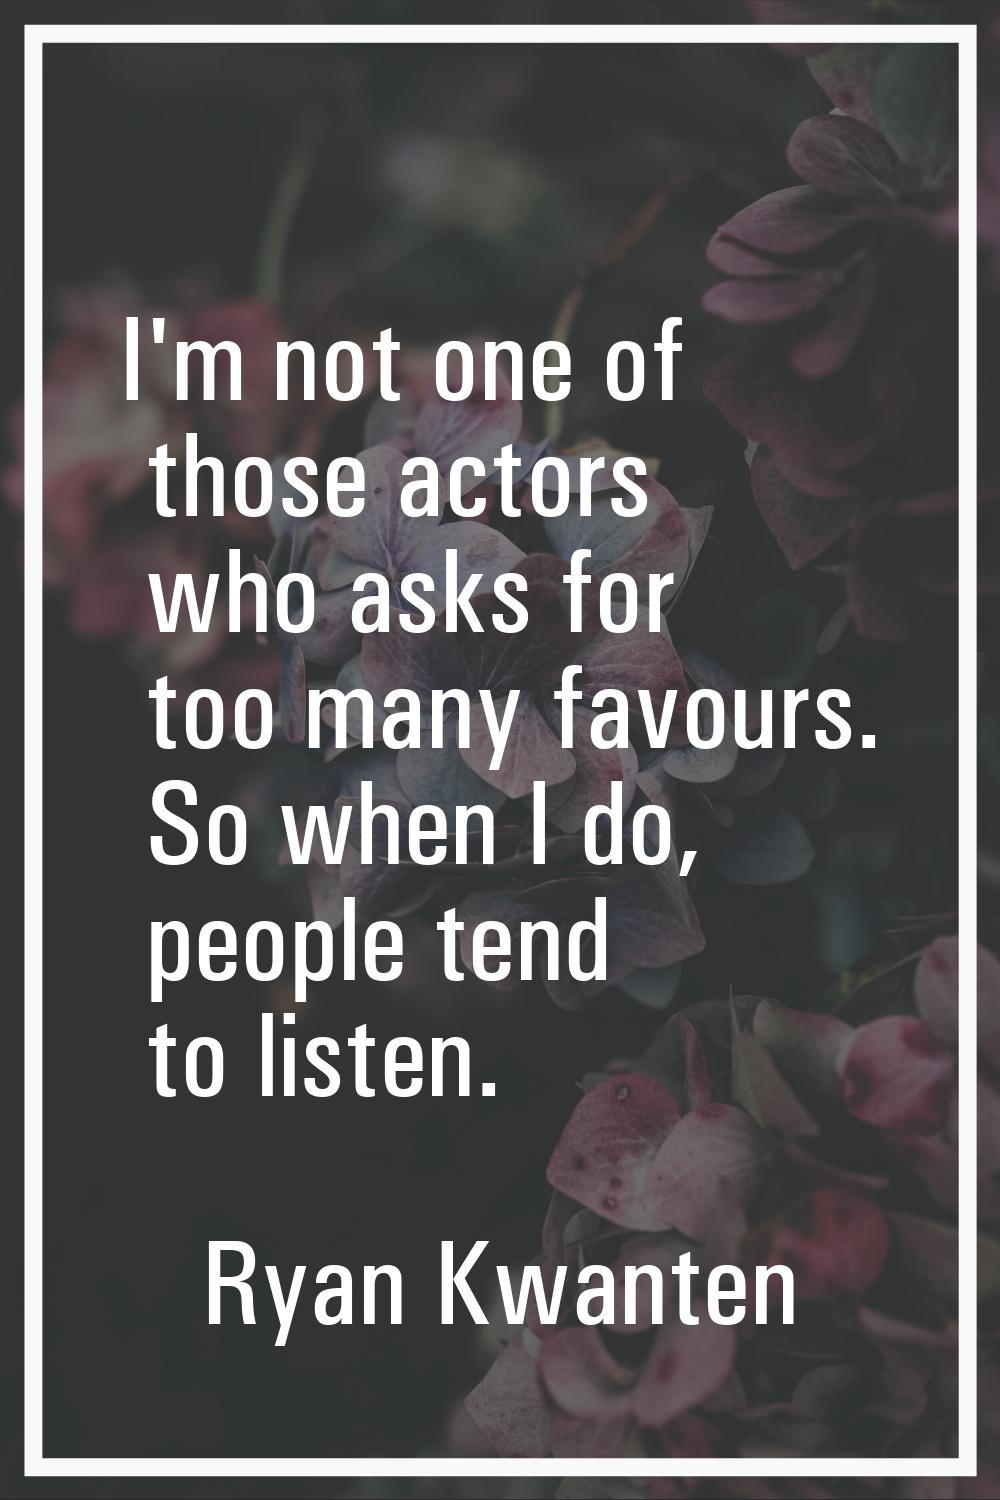 I'm not one of those actors who asks for too many favours. So when I do, people tend to listen.